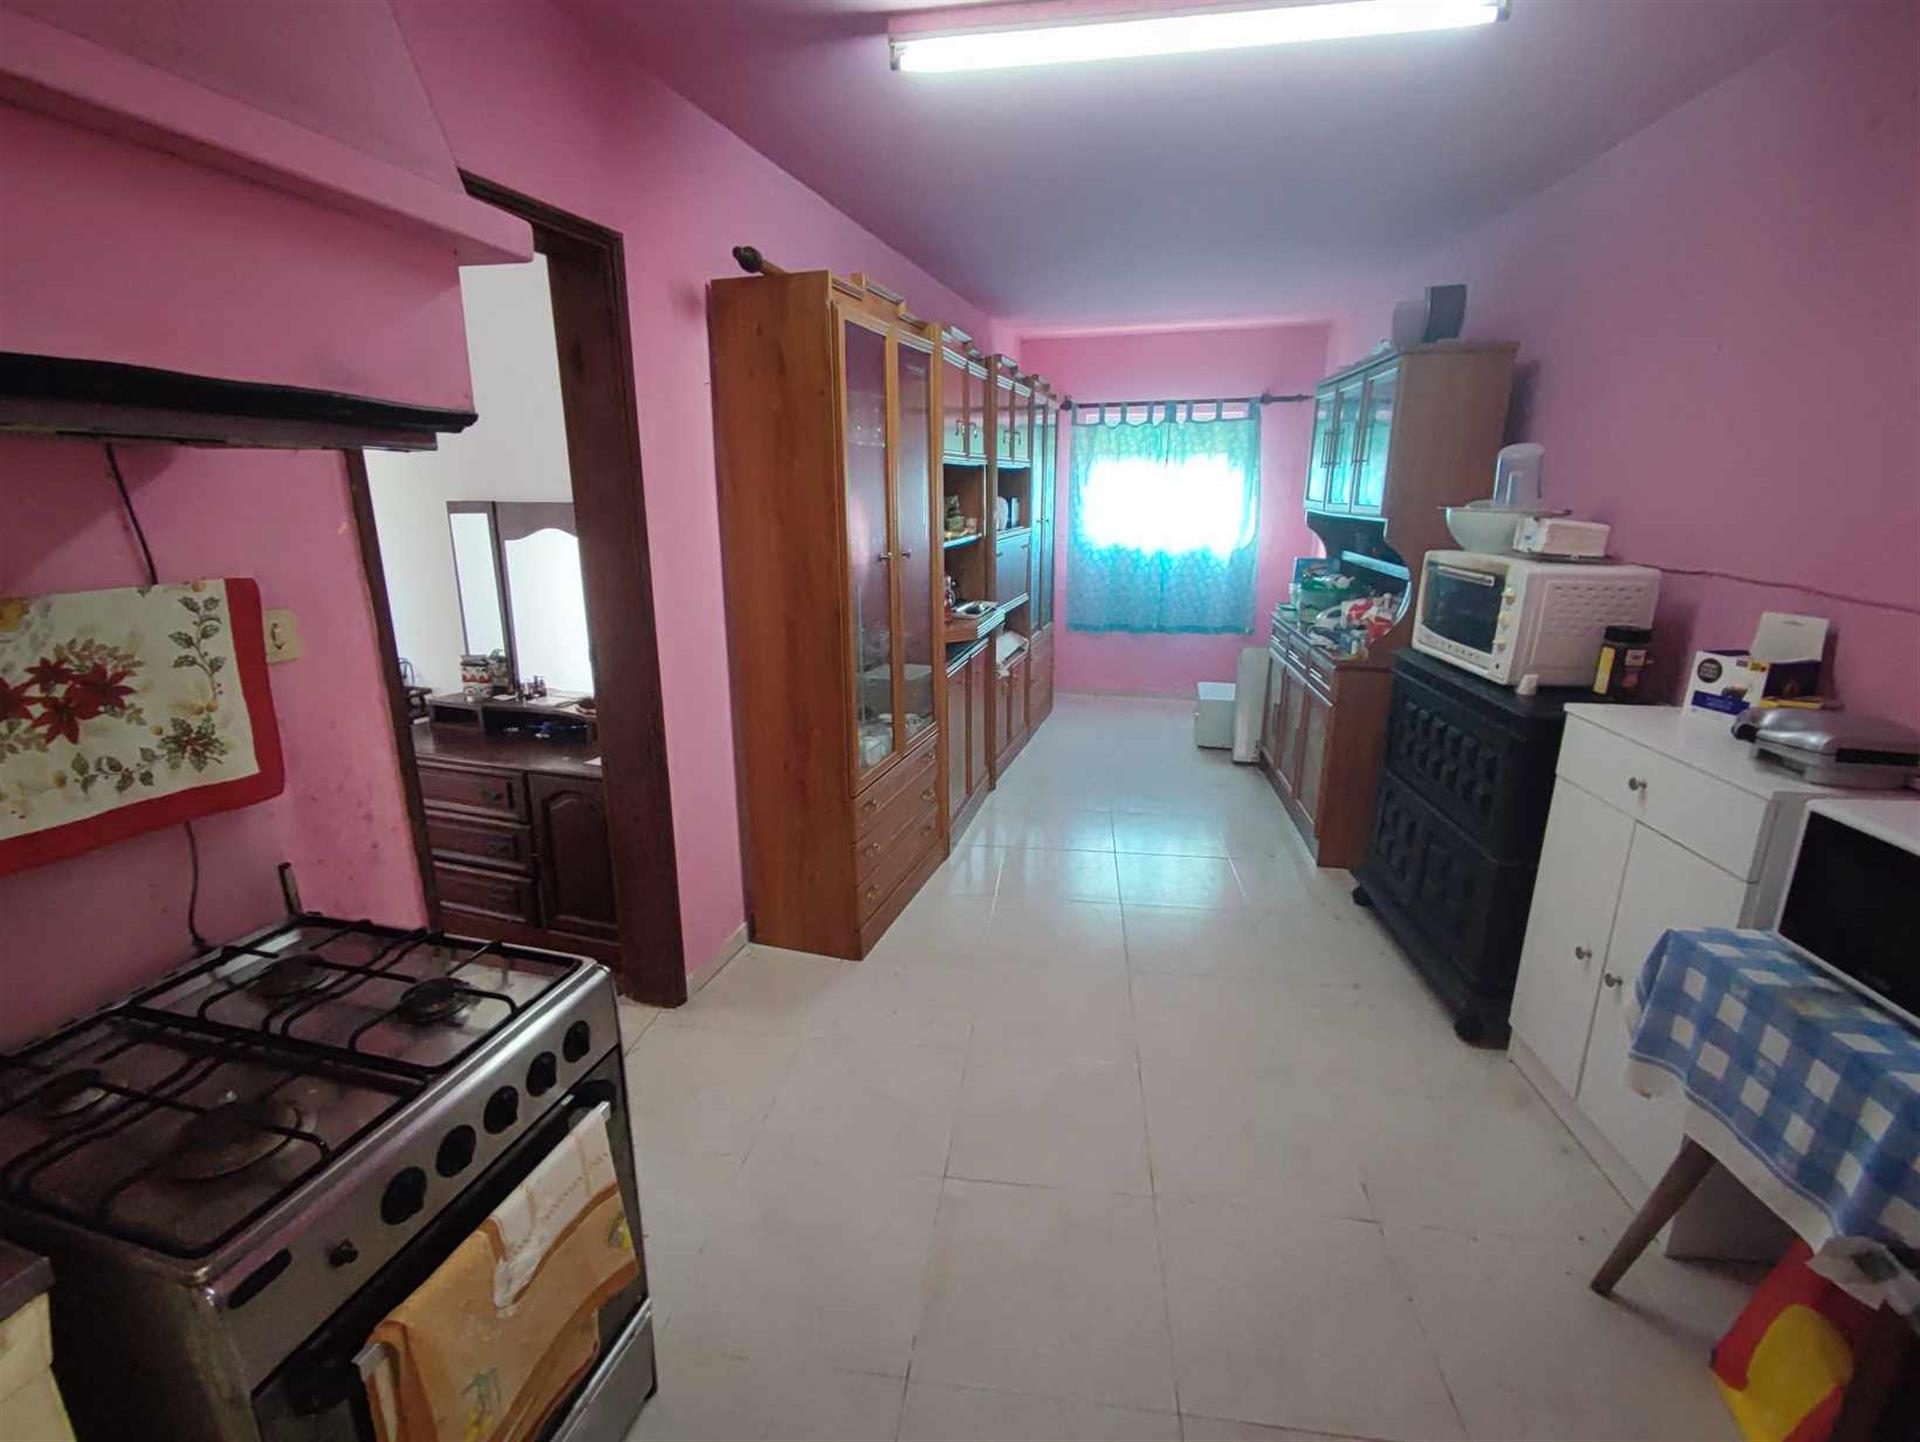 3+2 bedroom villa with backyard in Pataias